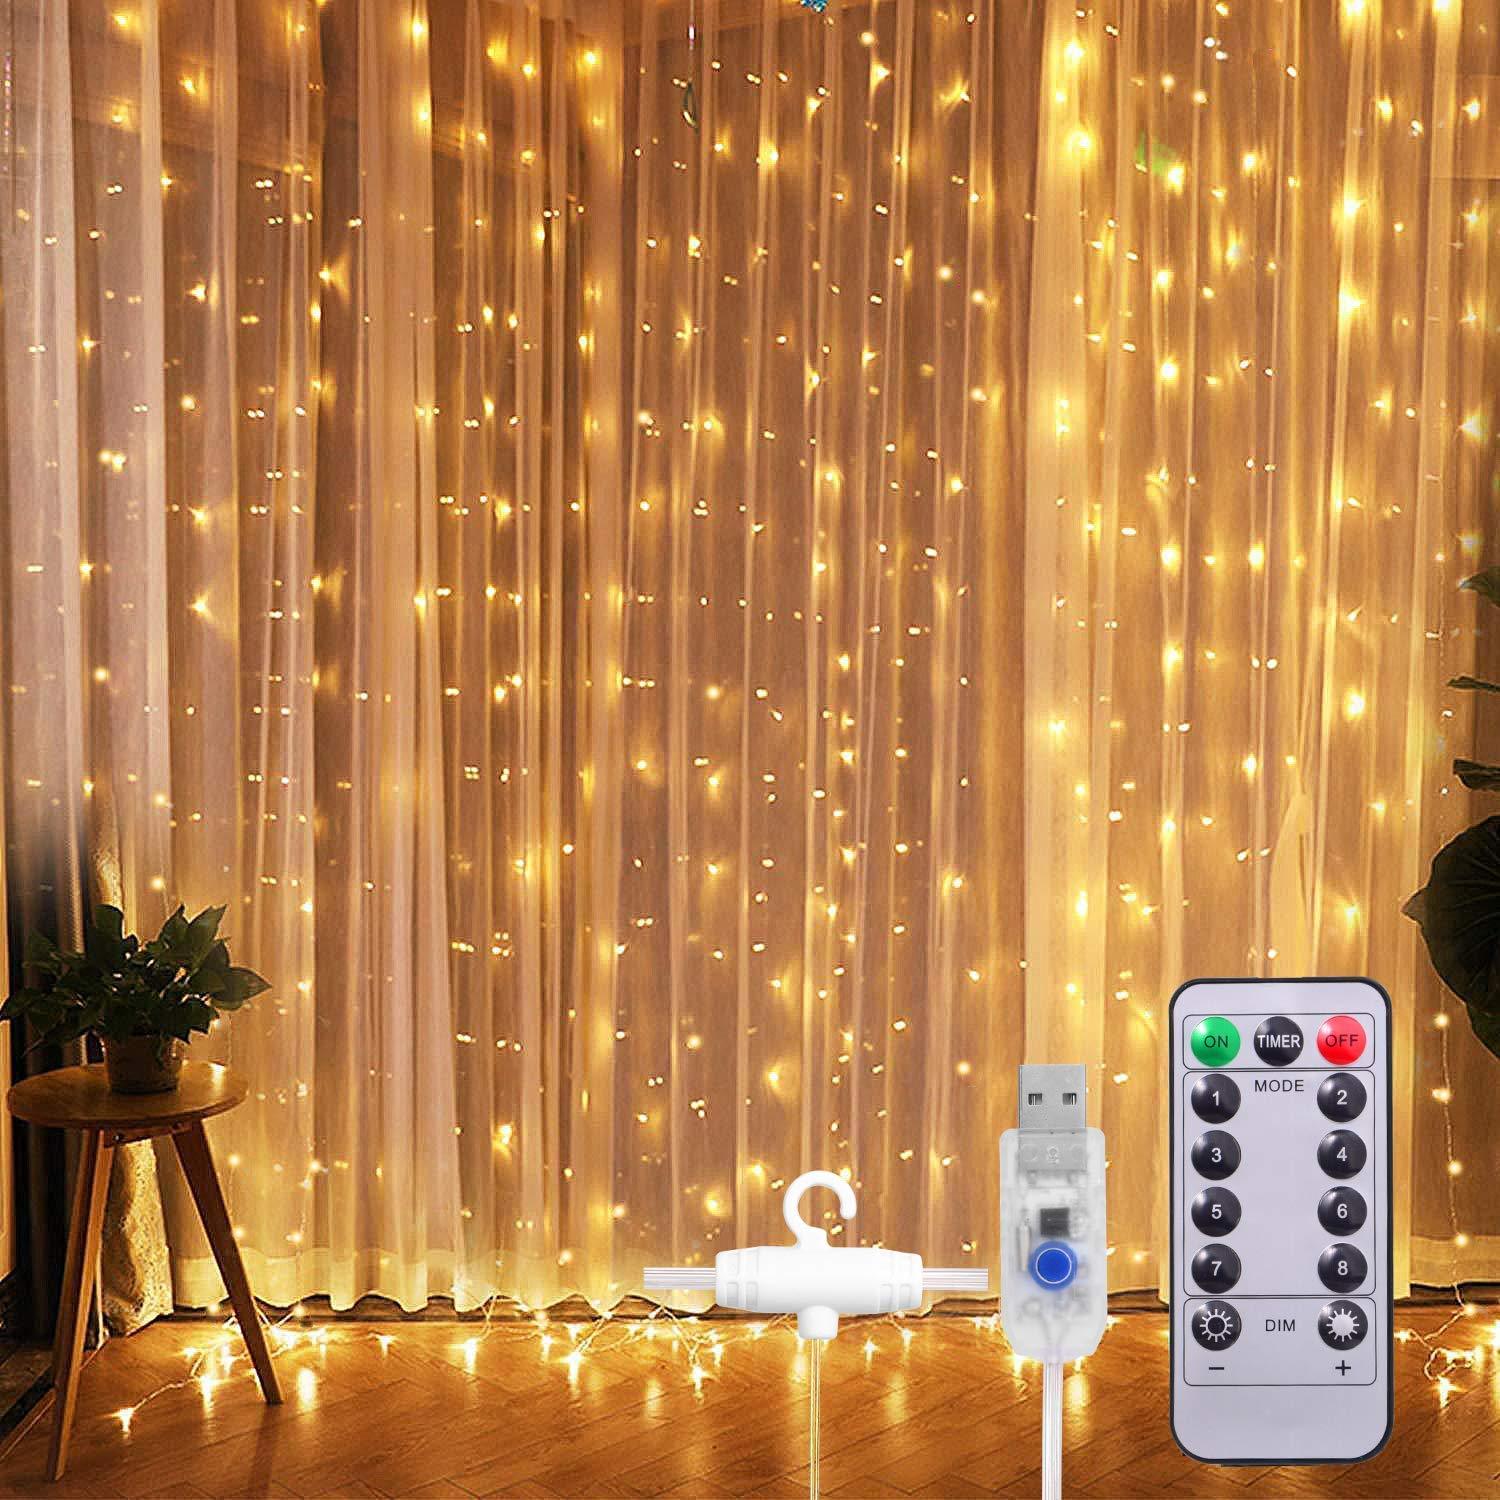 Window Curtain String Lights for Christmas Bedroom Party Wedding Home - If you say i do